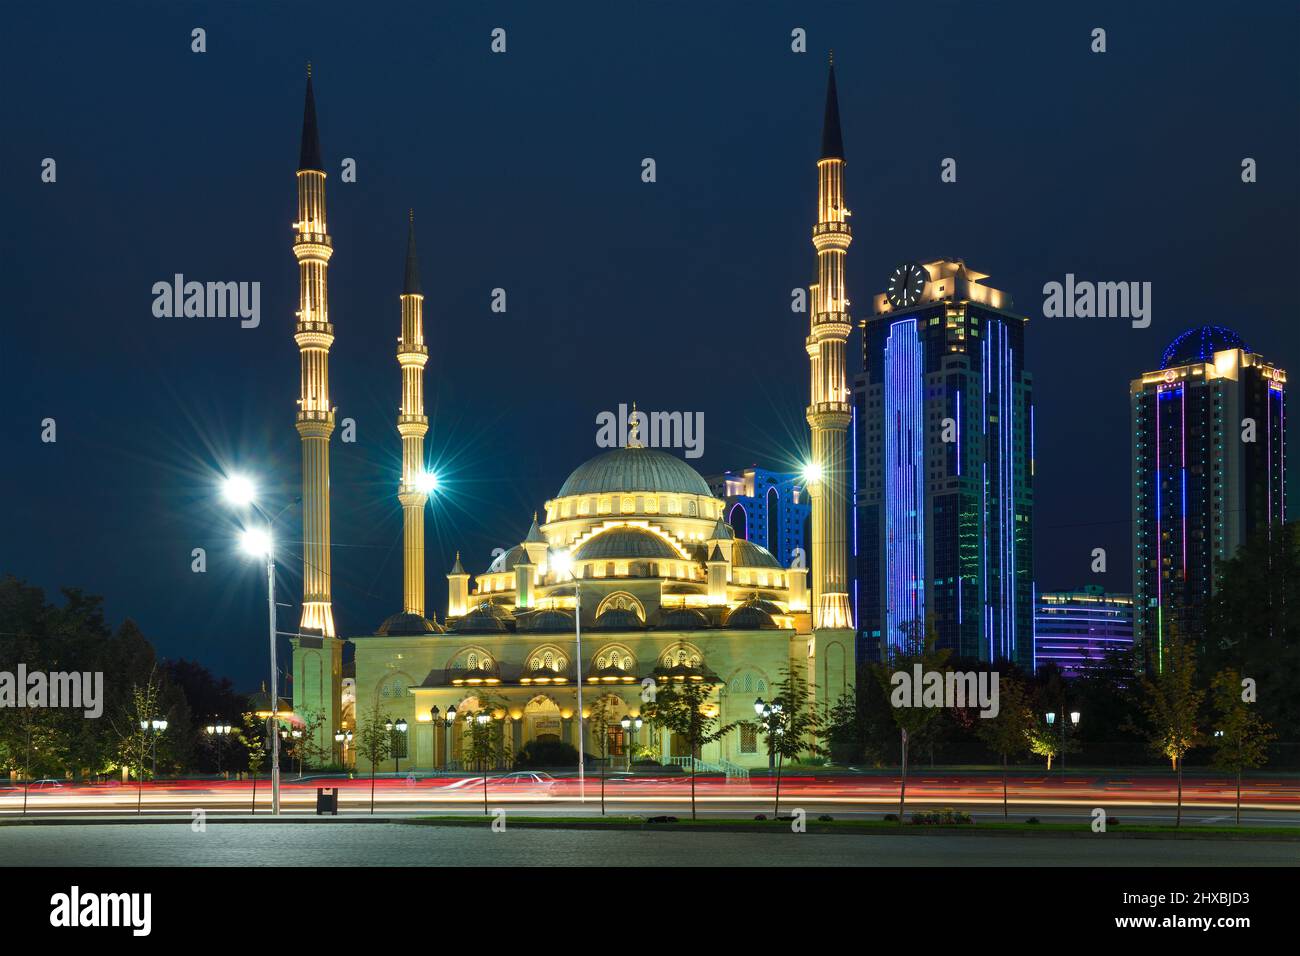 GROZNY, RUSSIA - SEPTEMBER 29, 2021: View of the central mosque 'Heart of Chechnya' on the late September evening. Chechen Republic Stock Photo